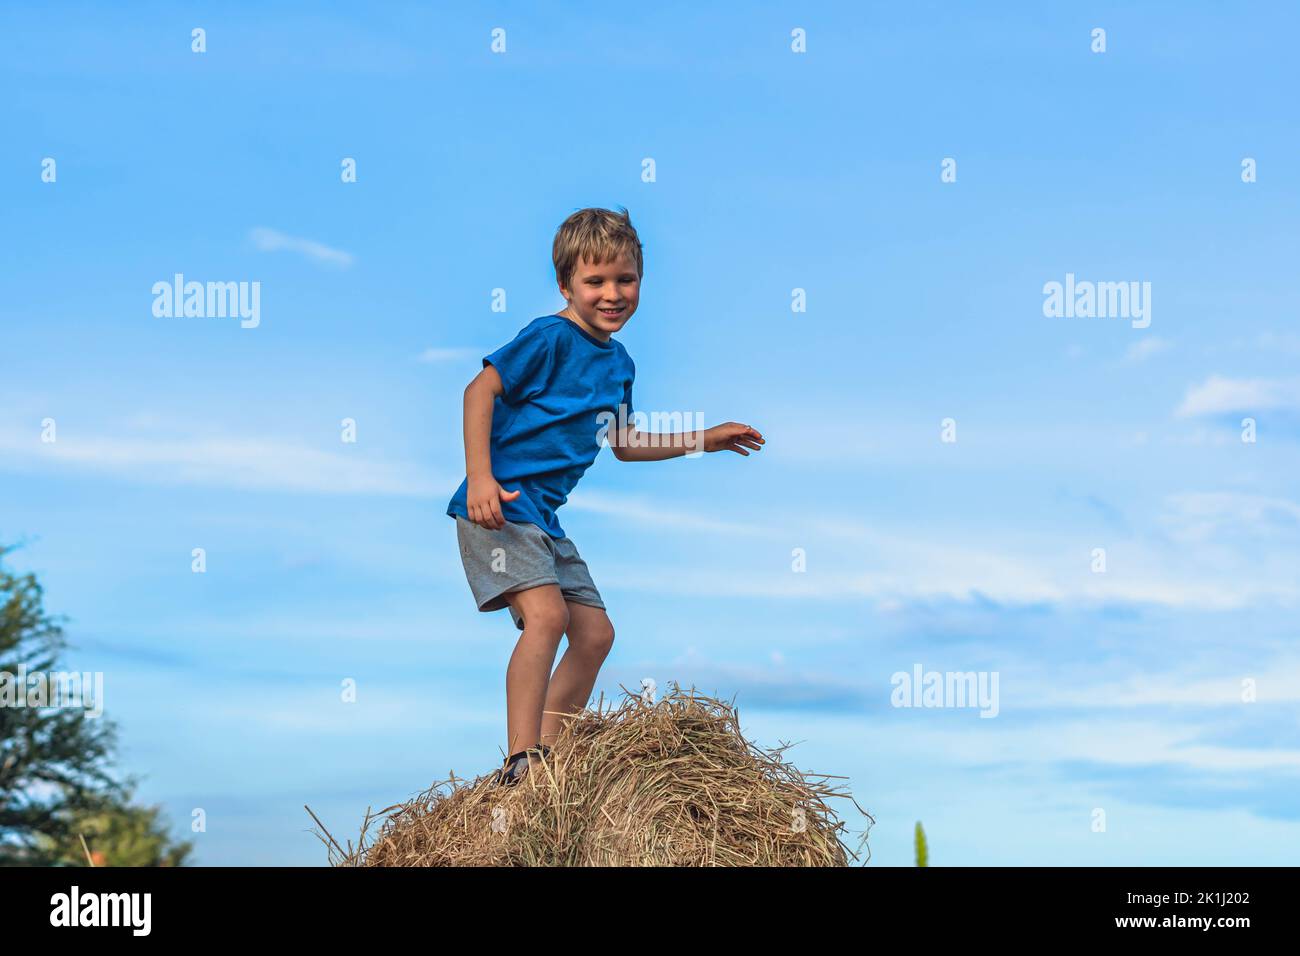 Boy smile play dance grimace show off blue t-shirt stand on haystack bales of dry grass, clear sky sunny day. Balance training. Concept happy Stock Photo